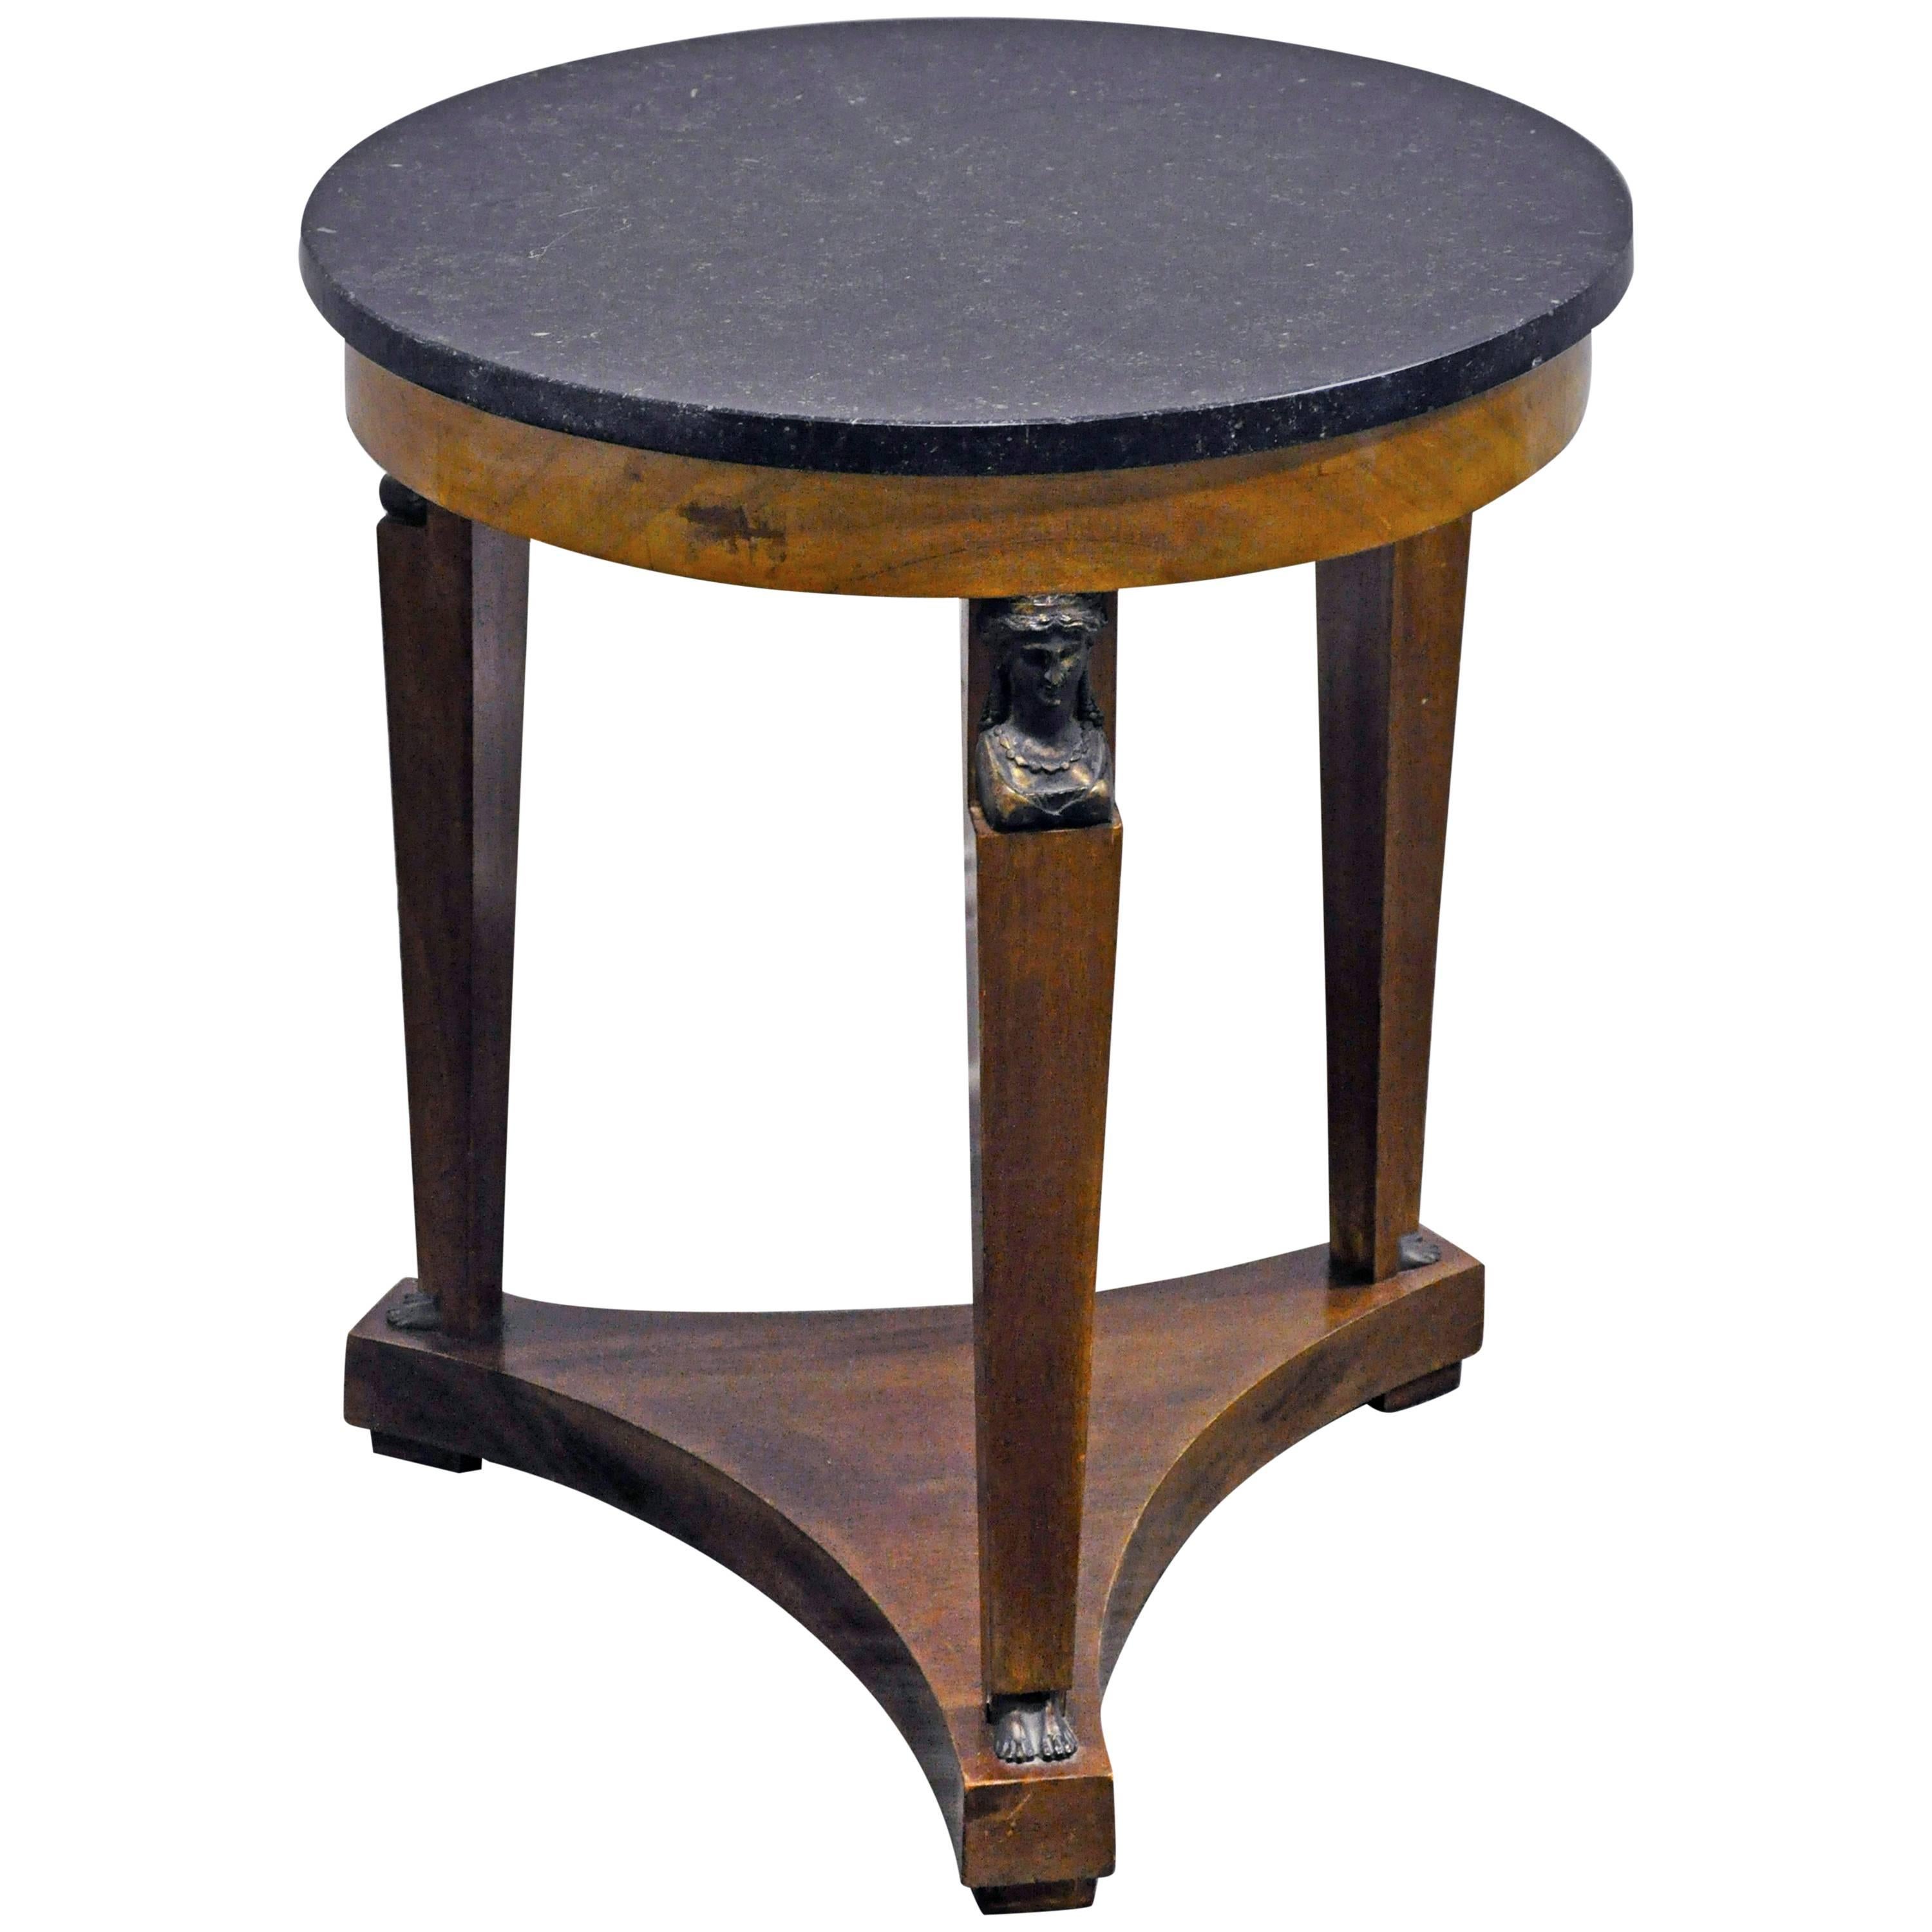 Early 20th Century Empire Style Gueridon with Marble Top